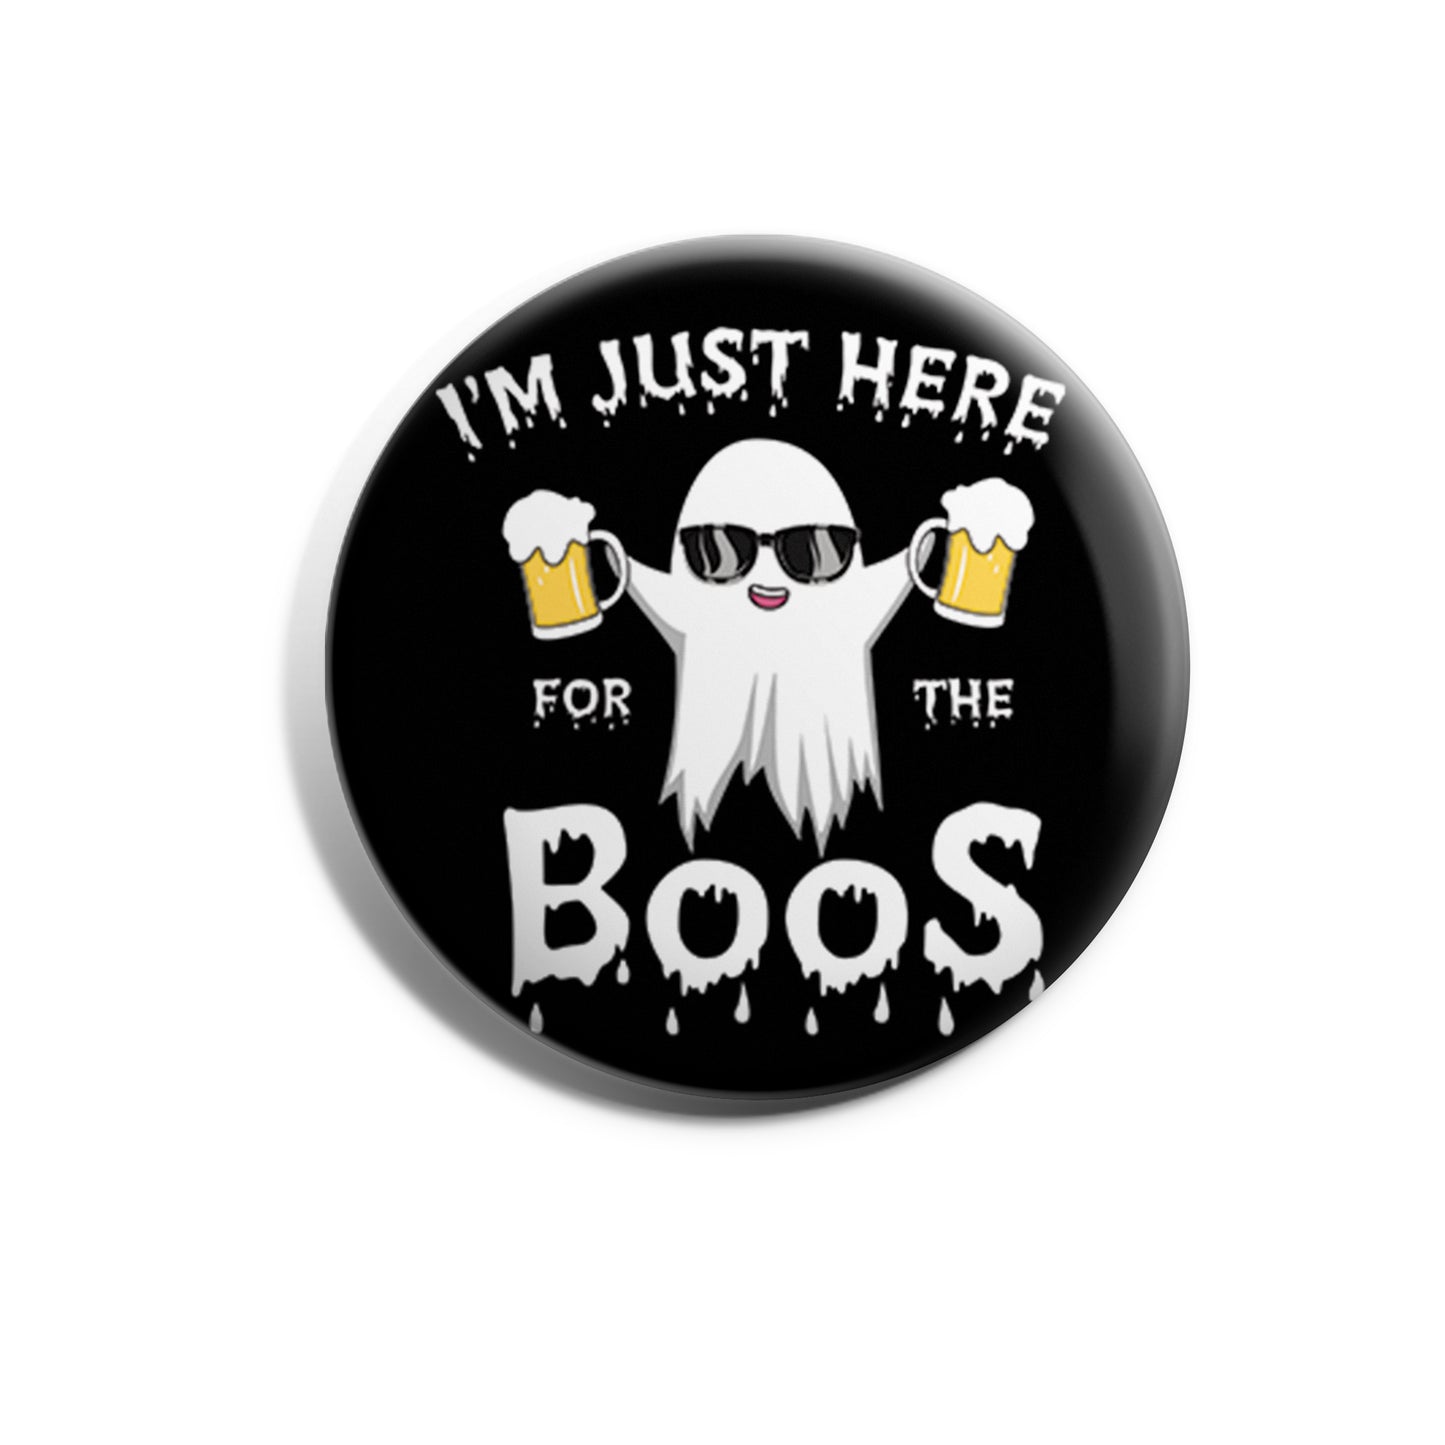 I'm Just Here For The Boos (Beer)